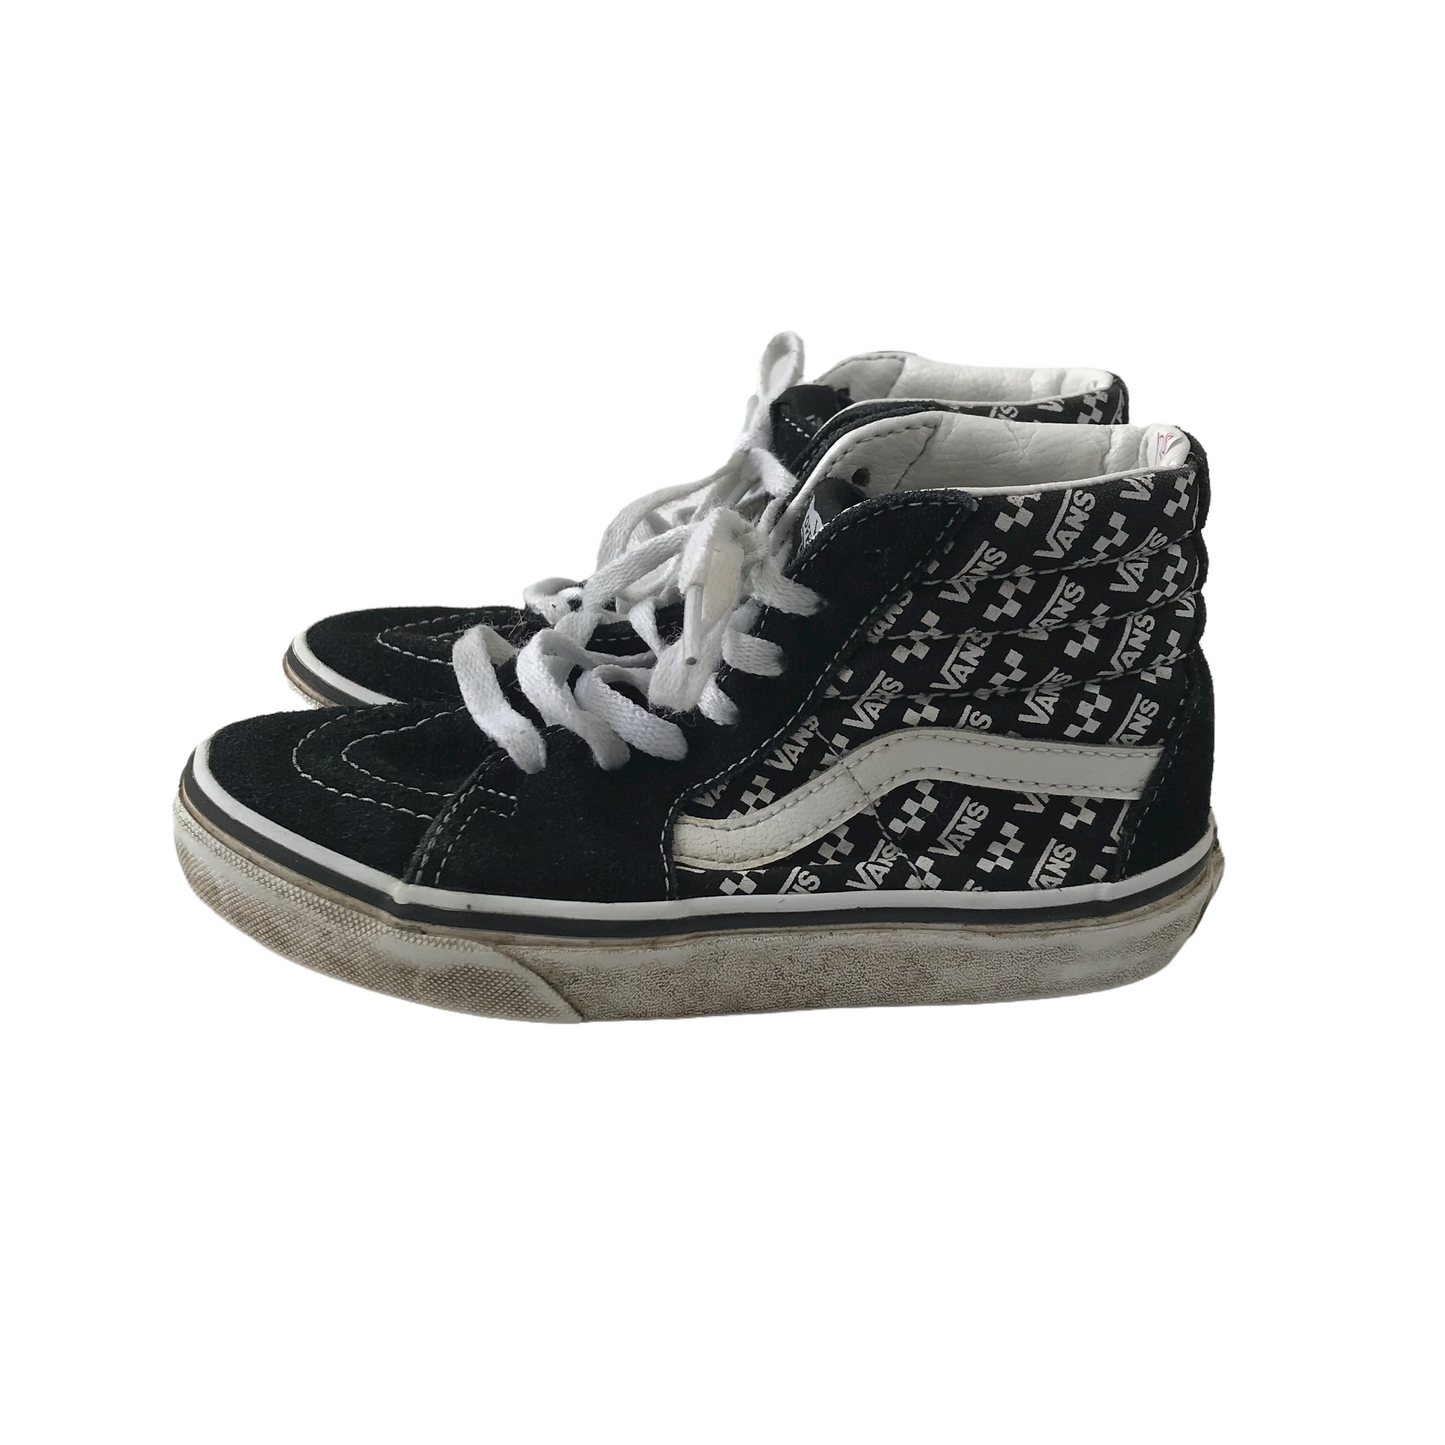 Vans Black and White High Tops Trainers Shoe Size 13 (jr)